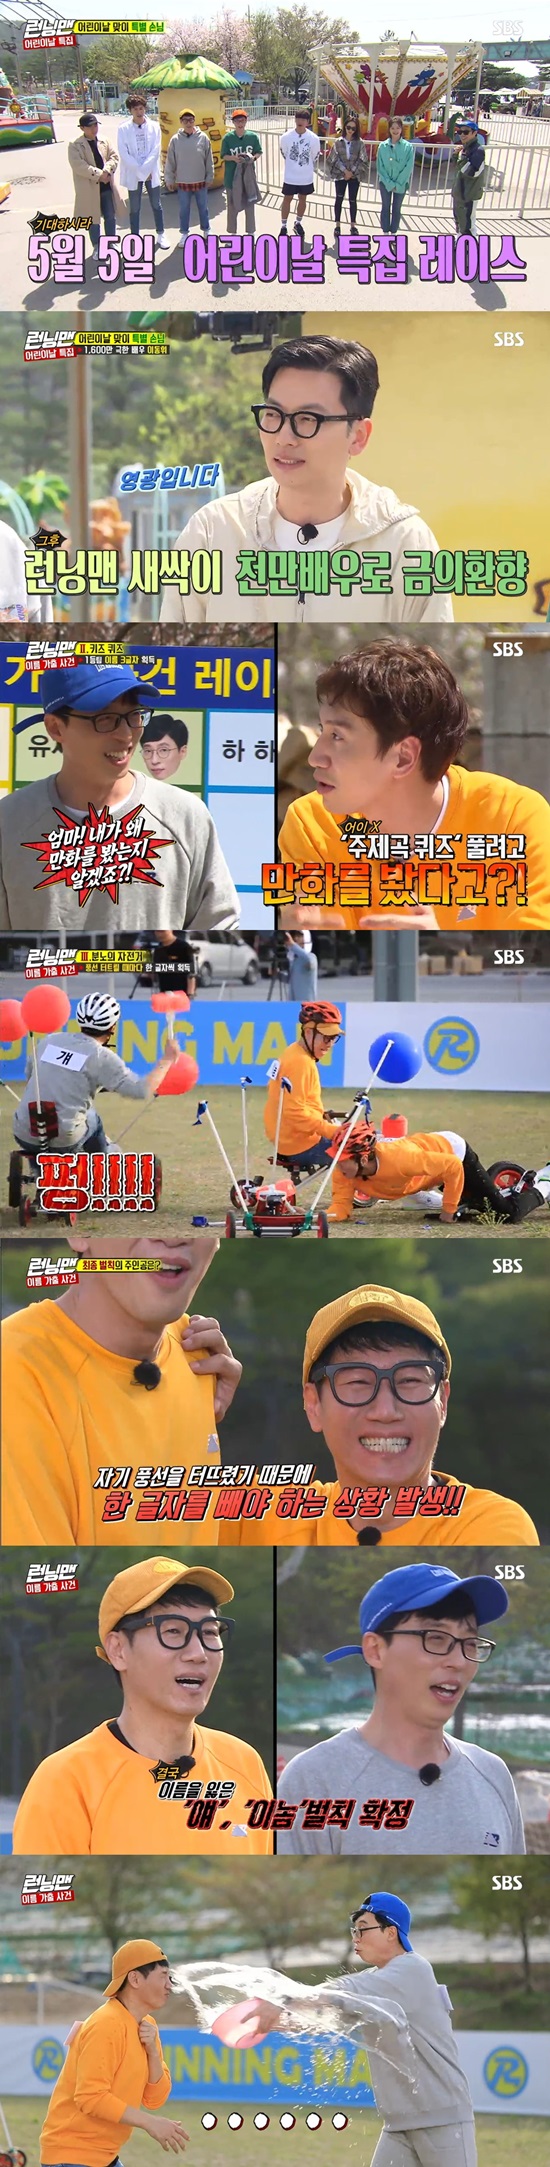 Running Man Yoo Jae-Suk and Ji Suk-jin became the best one minute protagonists.According to Nielsen Korea, the highest audience rating per minute of SBS entertainment Running Man broadcasted on the 5th was 6.4%.On this day, Running Man was decorated with a special Name runaway case race on Childrens Day, and the members went to the game to regain their name tag with their name.As a guest, actor Yi Dong-hwi, who is about to release the movie Little Client, appeared.Father Avengers Ji Suk-jin, Yoo Jae-Suk and Haha became team leaders, Ji Suk-jin team was Lee Kwang-soo and Song Ji-hyoga, Yoo Jae-Suk team was Yi Dong-hwi and Yang Se-chan, and Haha team was Jeon So-min and Kim Jong- Kook has become a team member.Since then, a full-scale race has begun.The first game was the age of memories that the first team could acquire the name 4 letters, and the second was the Kids Quiz where the first team could acquire the name 3 letters.The last mission was a tump-bump bike where you can find your name as much as you need. Every time you ride a bicycle and burst your opponents balloon, you get one letter.In the first half, the ace Kim Jong-kooks performance led to the championship of the small teams (Kim Jong-kook, Haha and Jeon So-min) and the remaining two teams in the second half.Lee Kwang-soos baby tricycle failed to beat the weight and broke two dongs, and the same team Yi Dong-hwi was in crisis because only one remaining balloon remained.Eventually, the race ended with Yang Se-chan bursting Lee Kwang-soos remaining balloon.As Yoo Jae-Suk found Seok, Ji Suk-jin also found all the names, but Ji Suk-jin had to take one out as he burst his balloon at the end.Lee Kwang-soo, who won the scissors rock, took out the stone and Ji Suk-jin and Yoo Jae-Suk, who were not completed, were punished.This scene was the highest audience rating of 6.4% per minute, accounting for the best one minute.Photo = SBS Broadcasting Screen